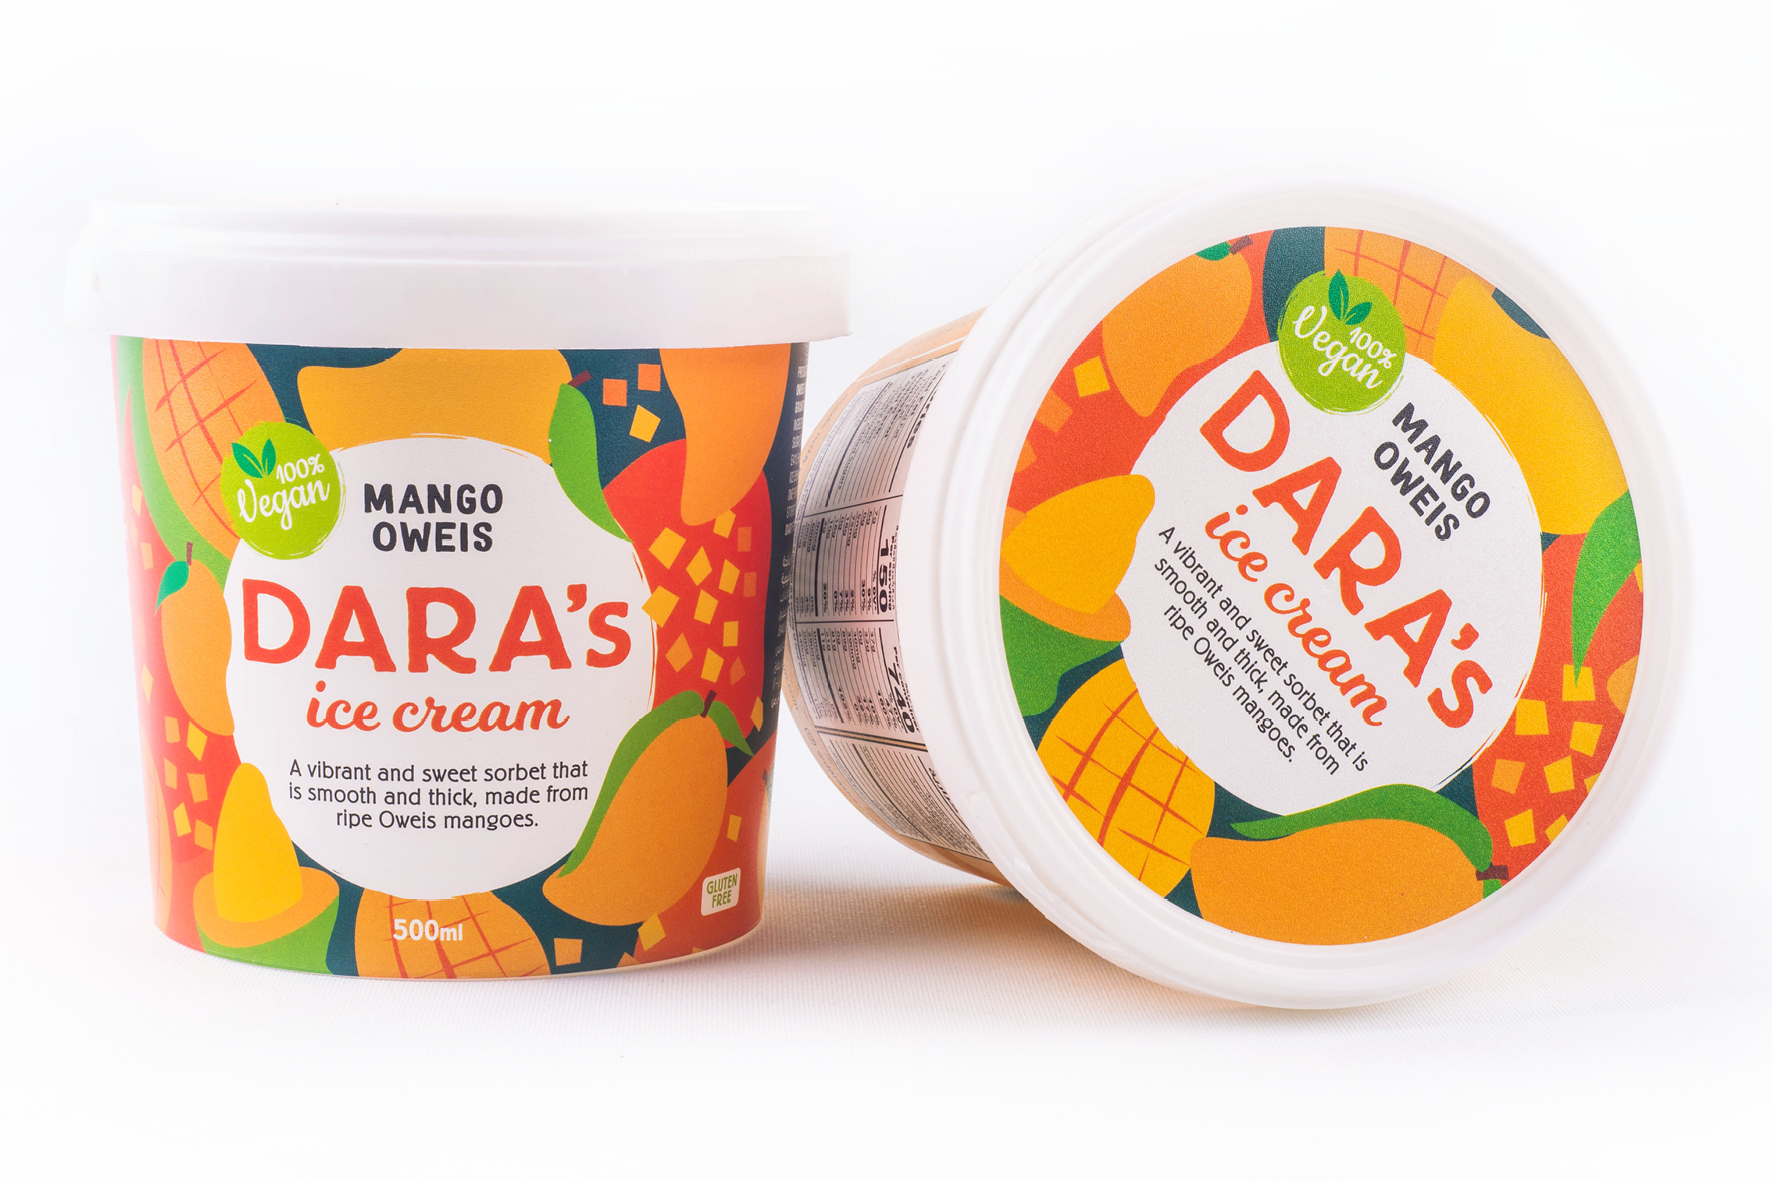 New Ice Cream Packaging Design for Dara’s Ice Cream by Tandem